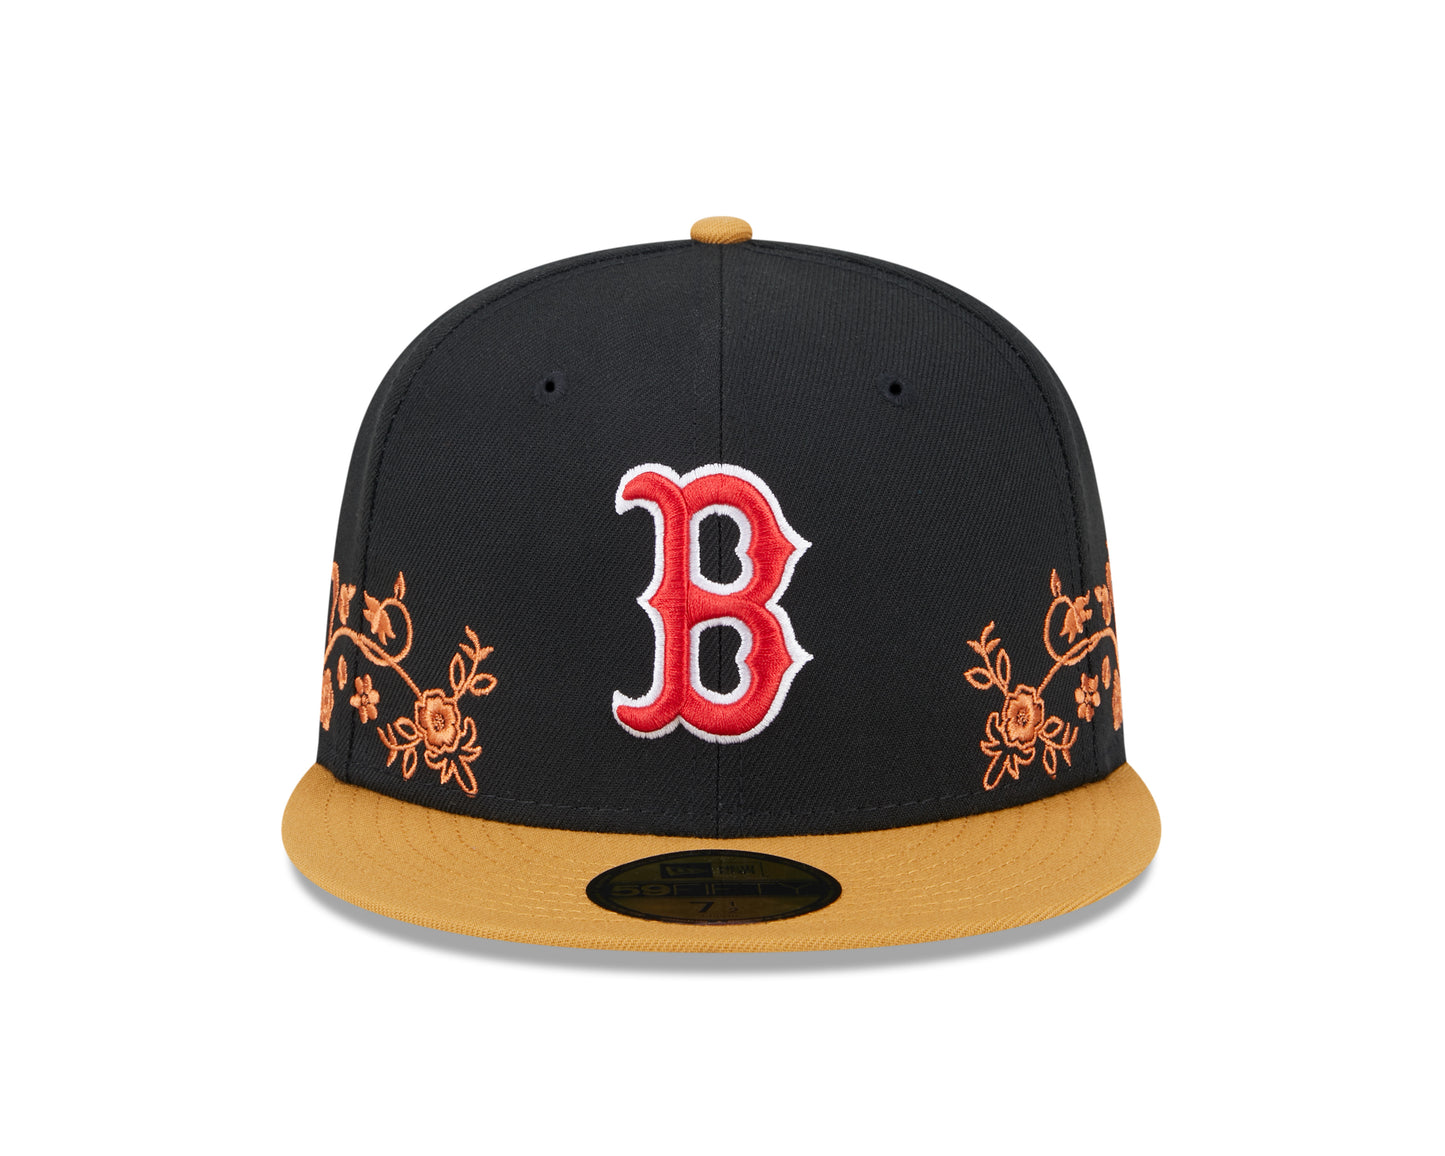 New Era - 59Fifty Fitted - FLORAL VINE - Boston Red Sox - Black - Headz Up 